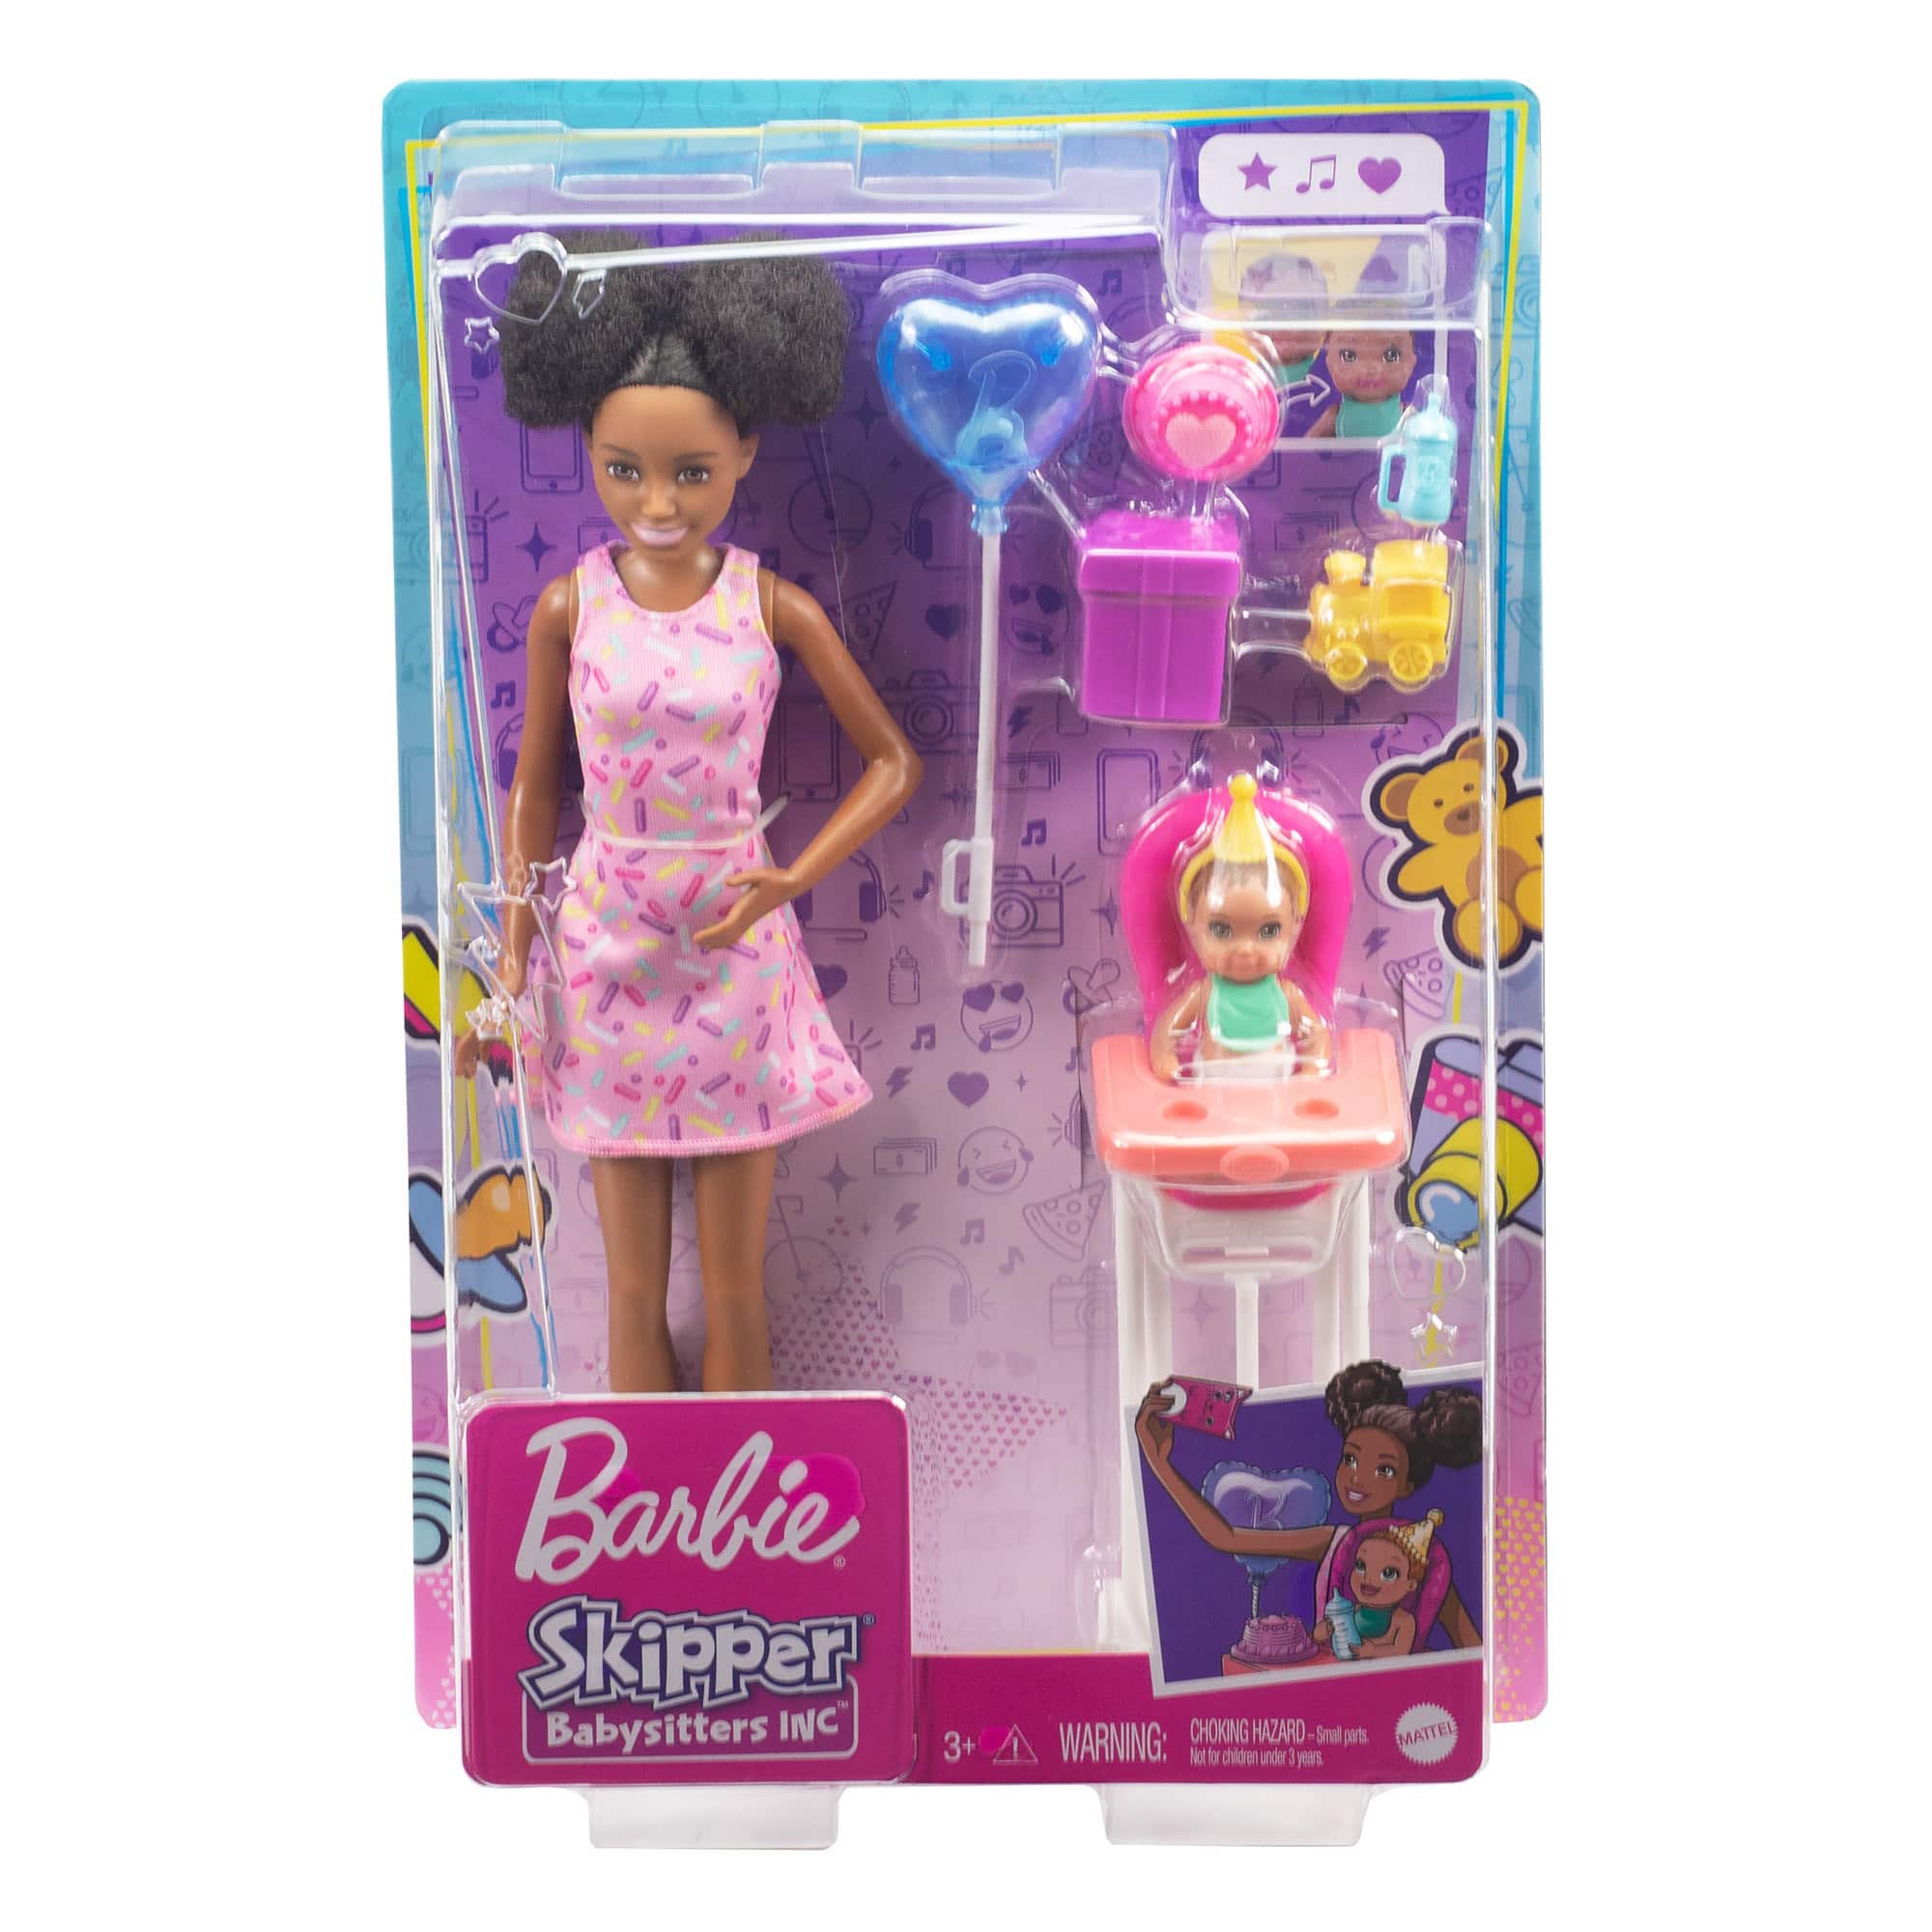 Barbie - Skipper Babysitters Inc - Party-Themed African American Doll Playset